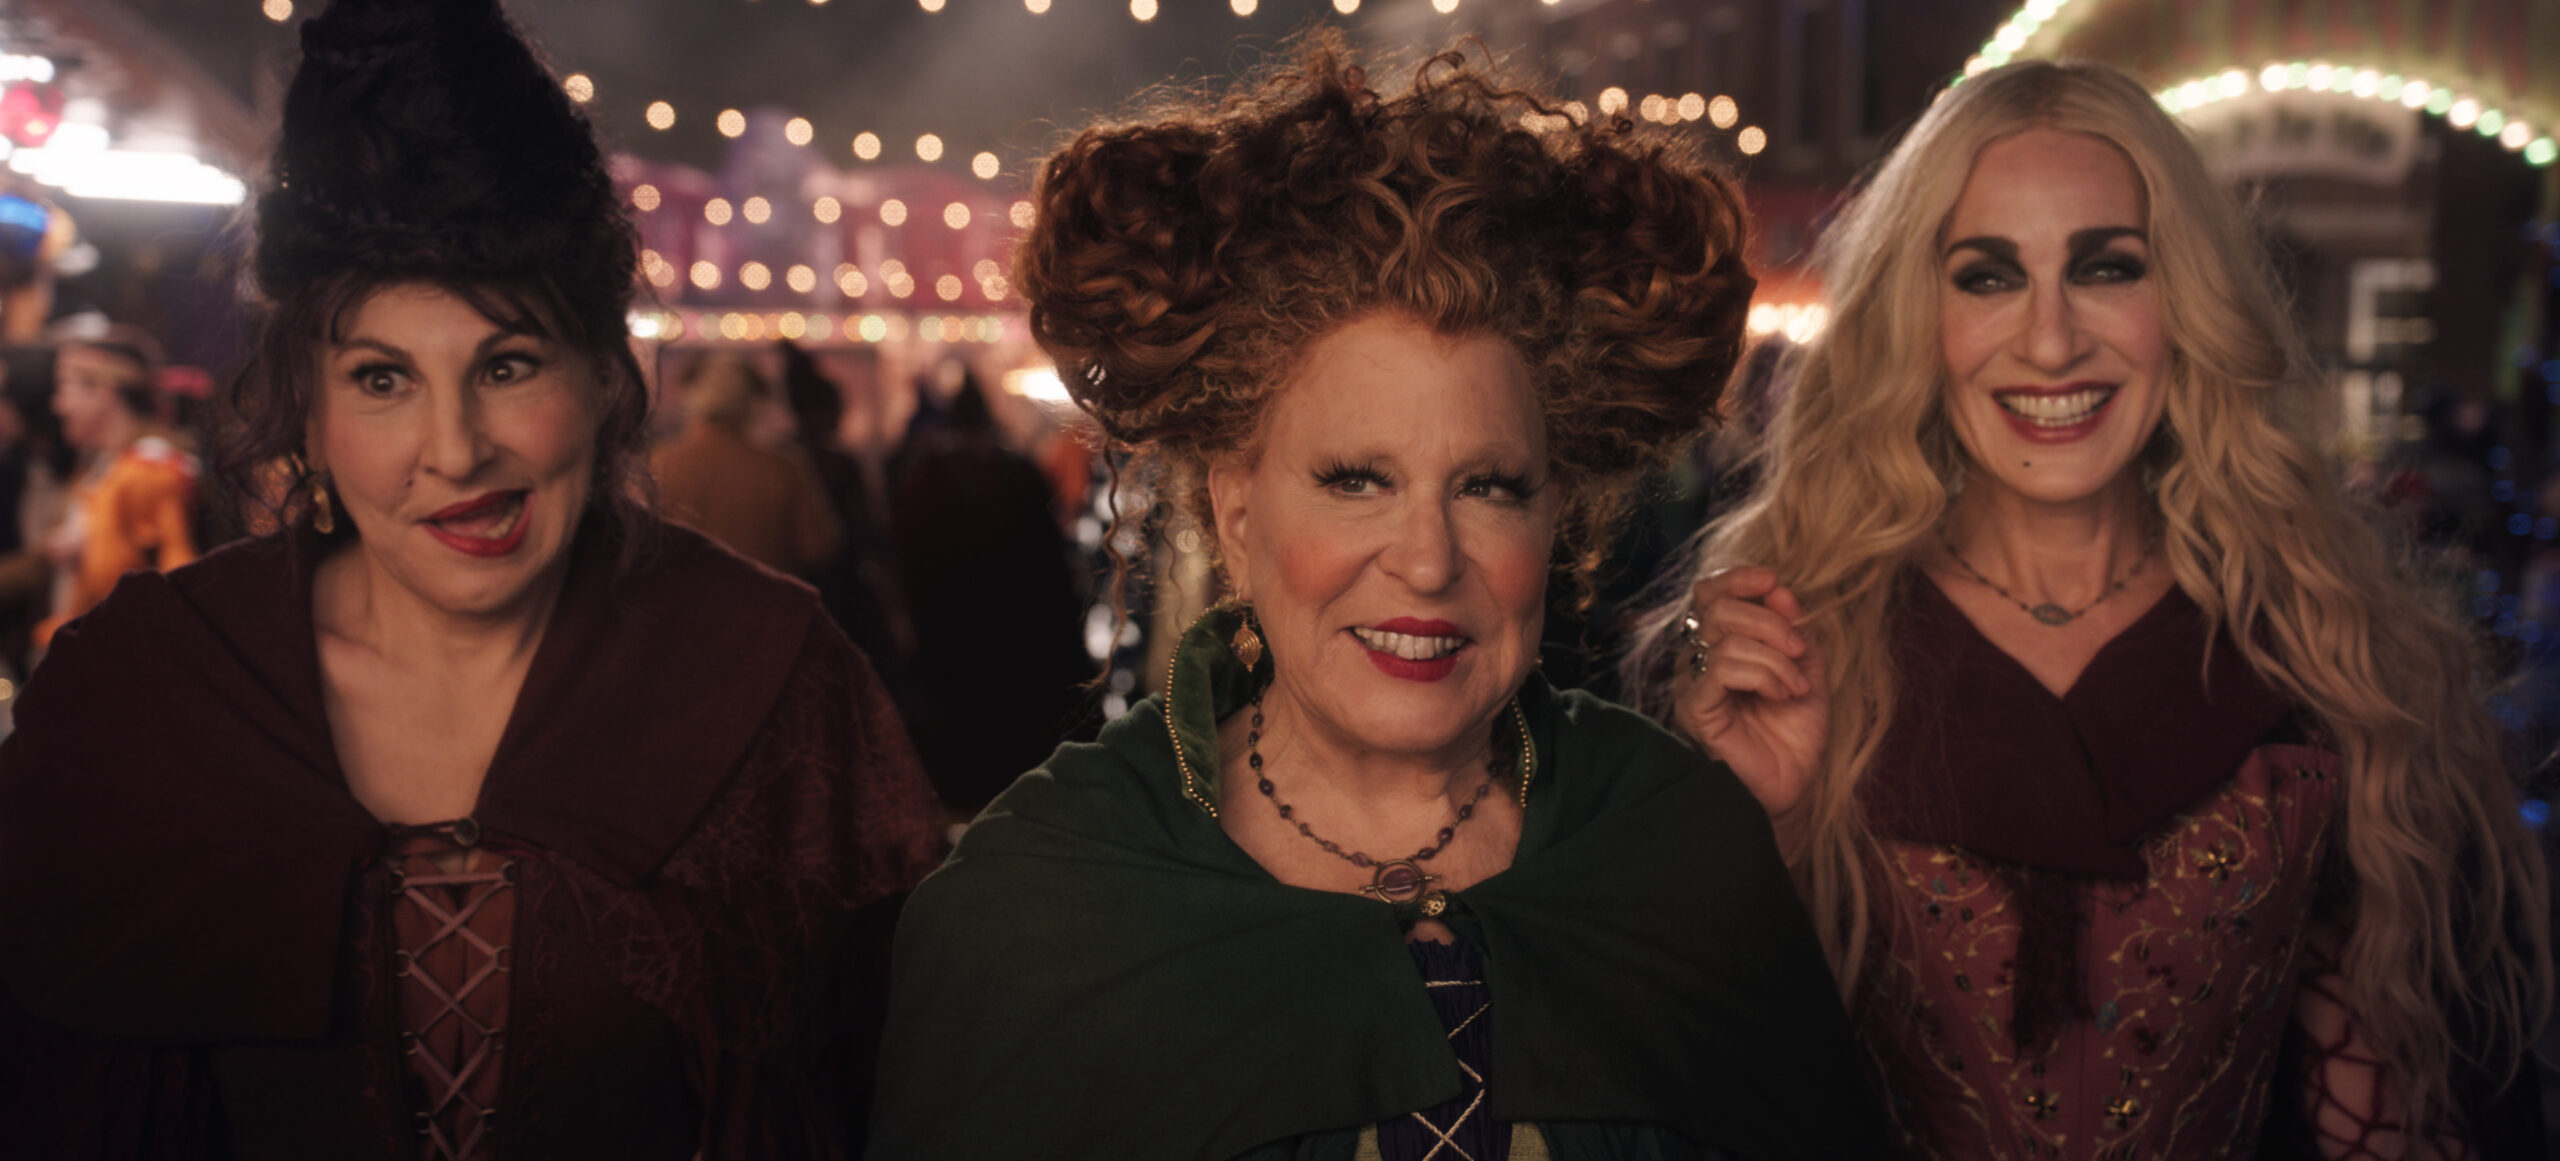 Hocus Pocus 2 Trailer Brings All The Spookiness To Disney+